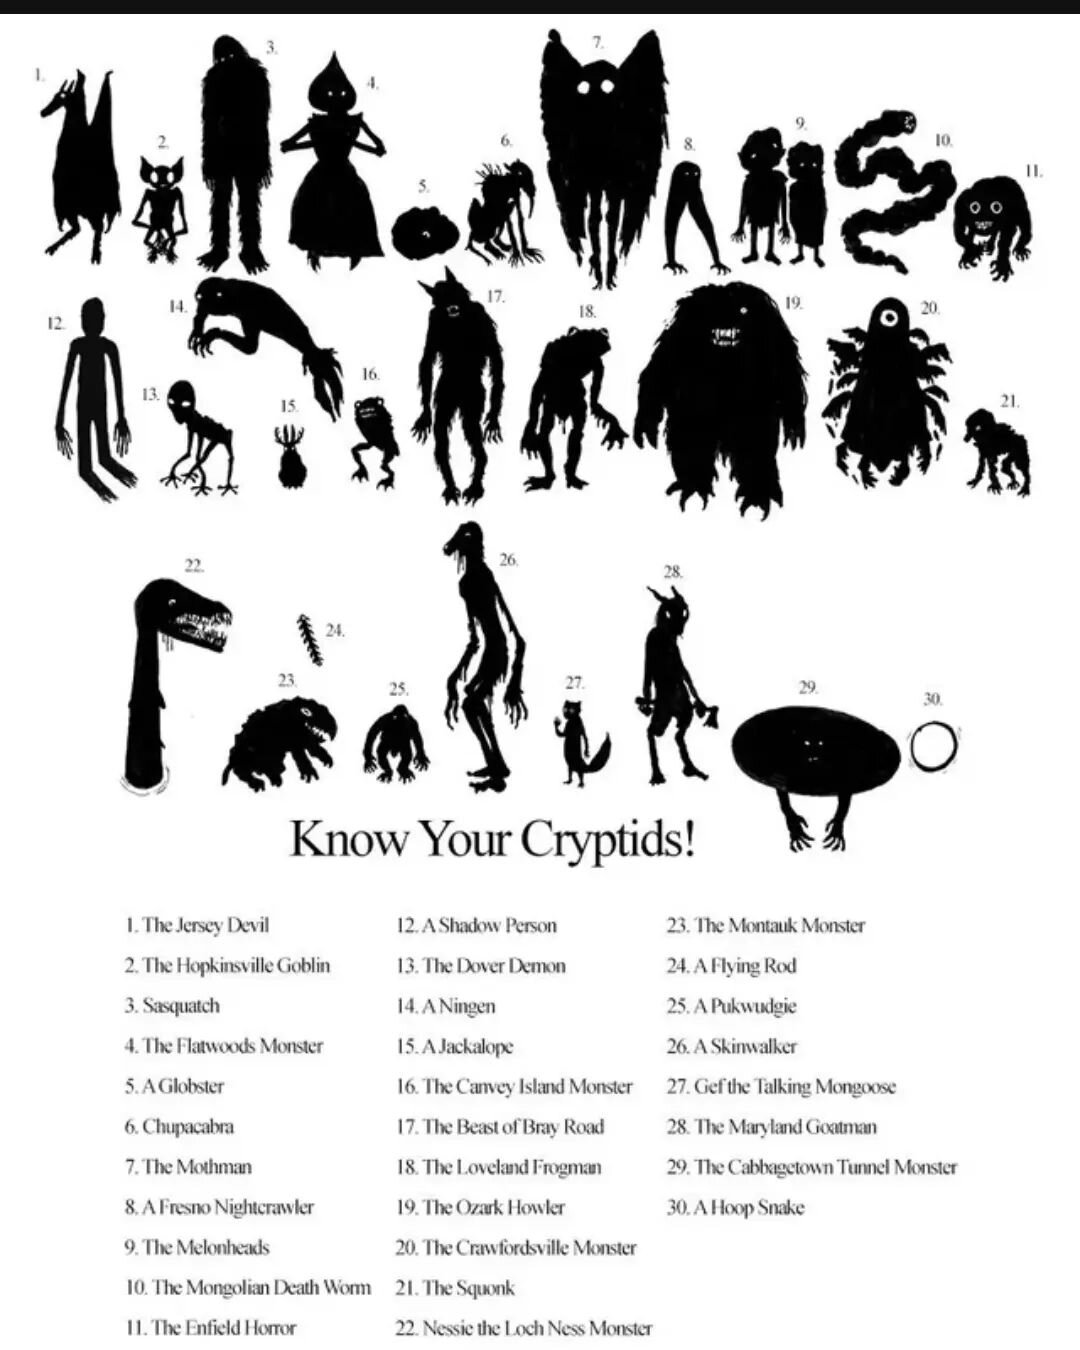 Know your cryptids!!! 
We are partial to Bigfoot bc we are in the PNW.
But tbh we love all the cryptids! 
Let us know your favorite cryptid in the comments!! 
.
.
.
#cryptids
#CryptidExpo
#CryptidArtsAndTattooExpo
#pnwcryptid